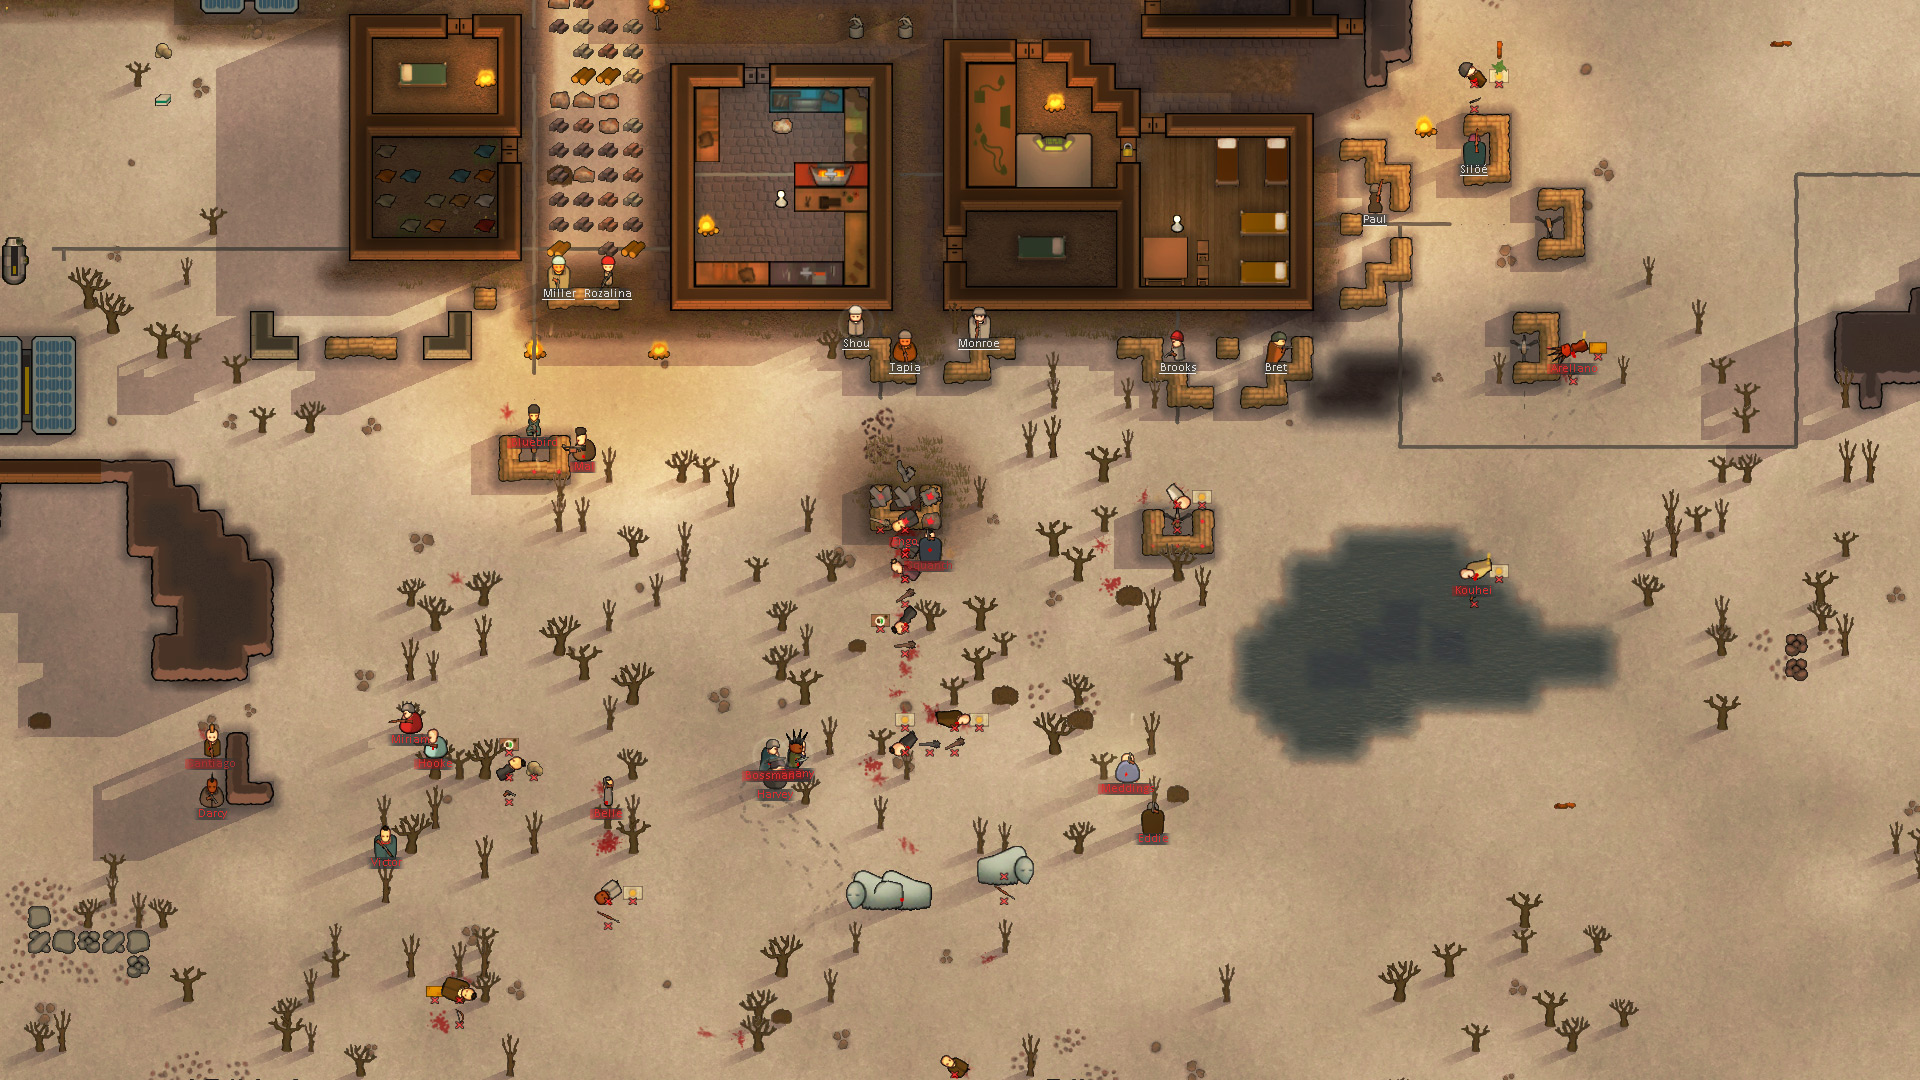 RimWorld developer reveals the game could have been very different